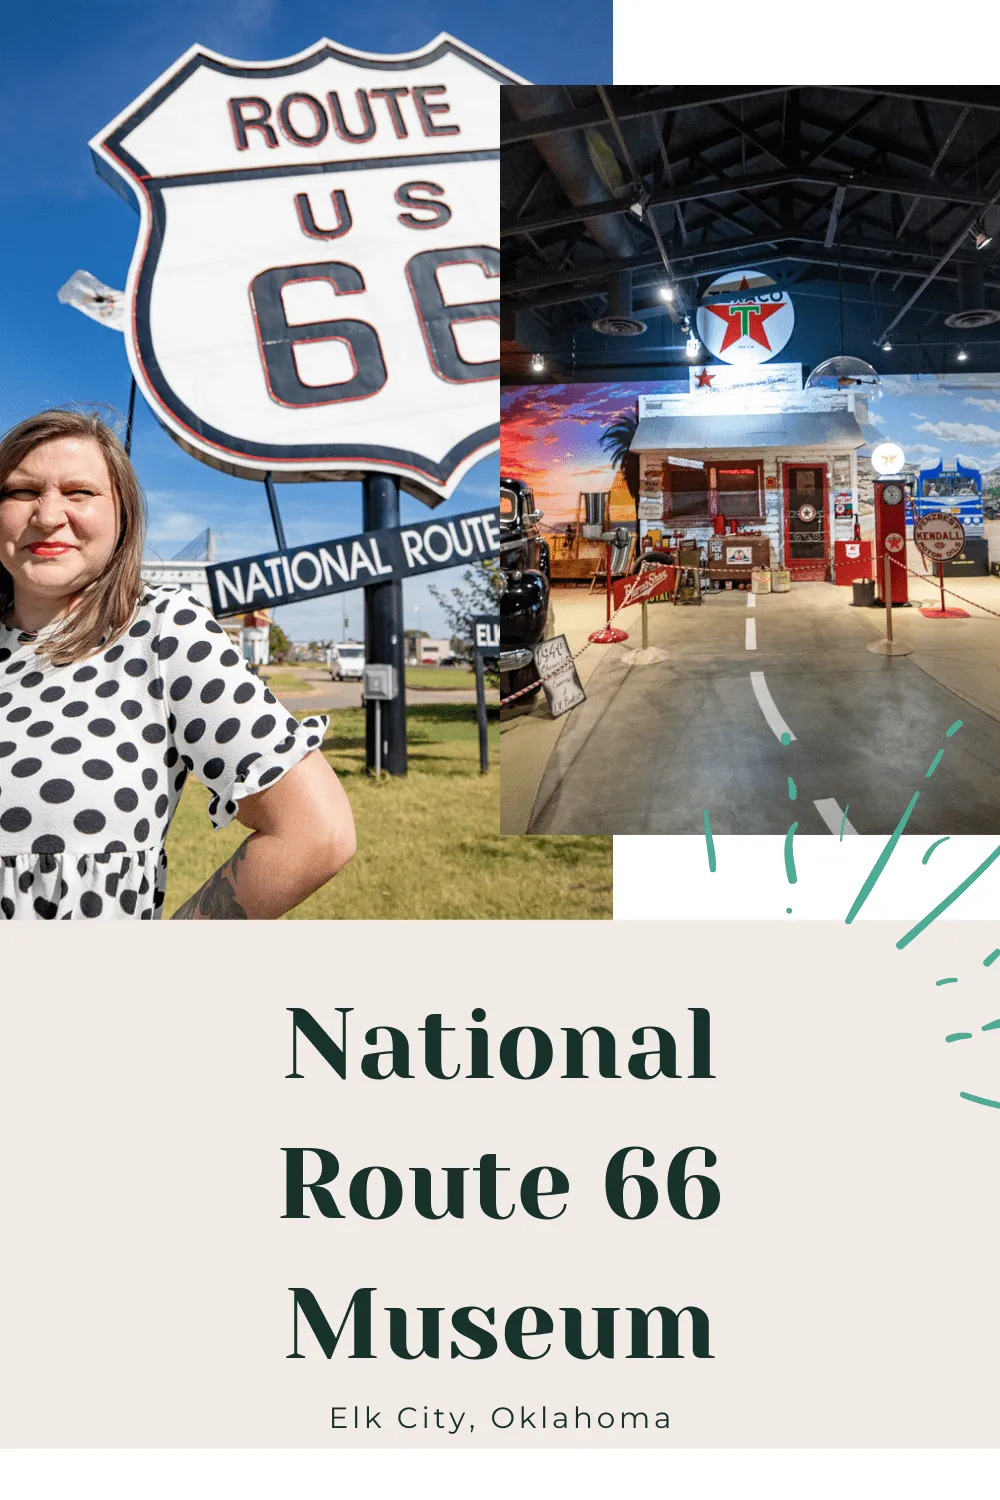 The National Route 66 Museum in Elk City, Oklahoma celebrates the Mother Road in both Oklahoma and beyond. Focused on the people who lived and work on the Mother Road along with the automobiles and places that defined it, the museum campus offers an interactive tour through history.   #RoadTrips #RoadTripStop #Route66 #Route66RoadTrip #OklahomaRoute66 #Oklahoma #OklahomaRoadTrip #OklahomaRoadsideAttractions #RoadsideAttractions #RoadsideAttraction #RoadsideAmerica #RoadTrip